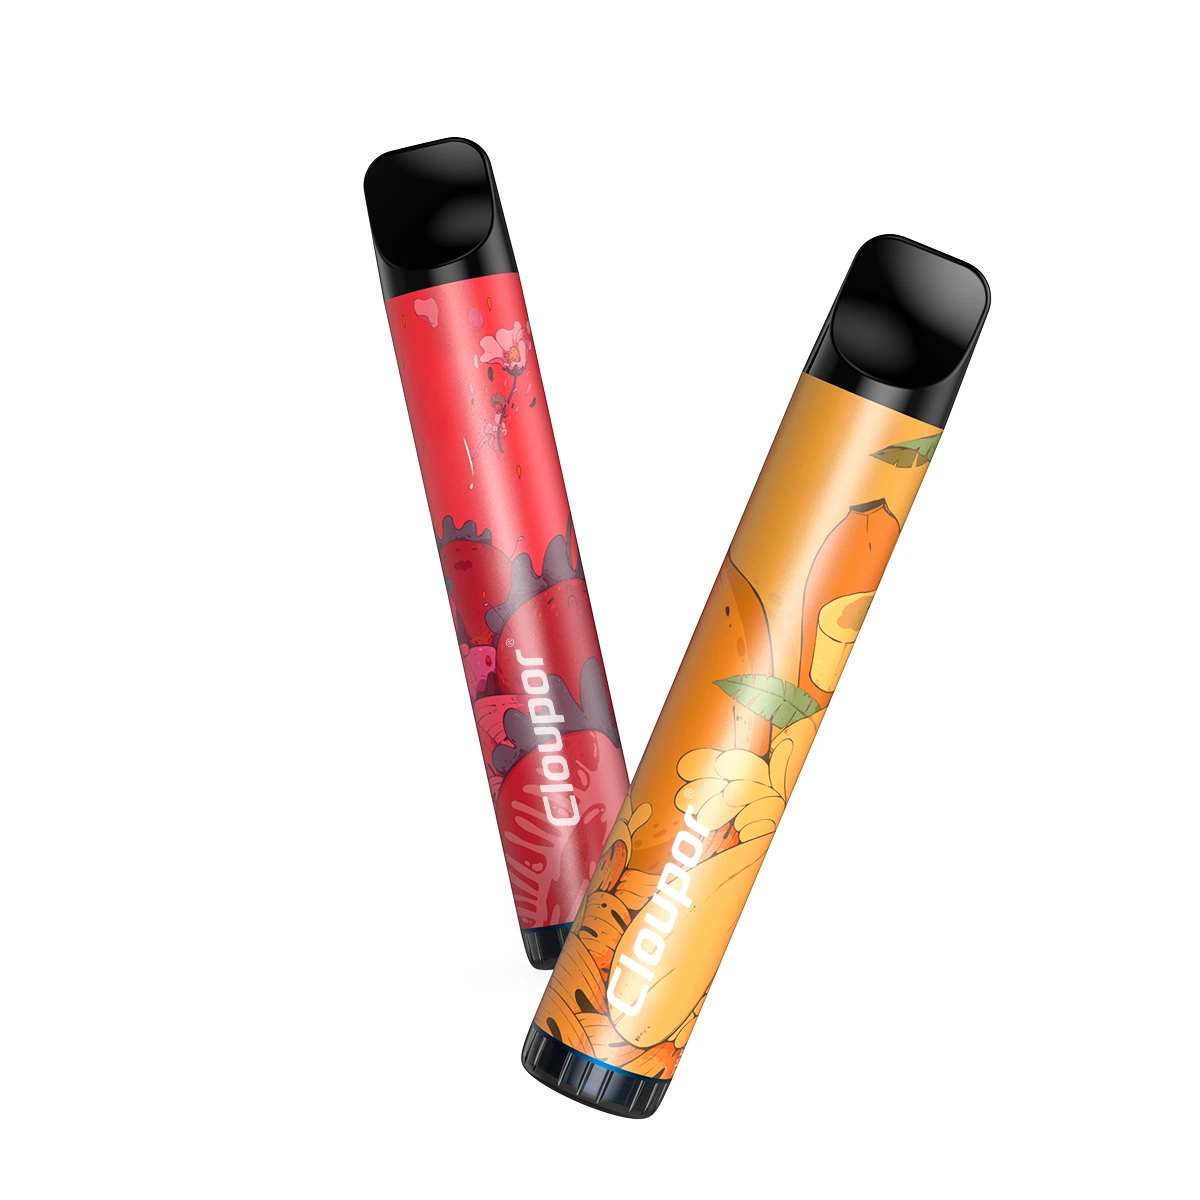 Beauty Extra Small 800 Puffs 8 Flavors Available Disposable/Chargeable Vape Pen Bulk Price Best Quality E Cigarette Puff Vape